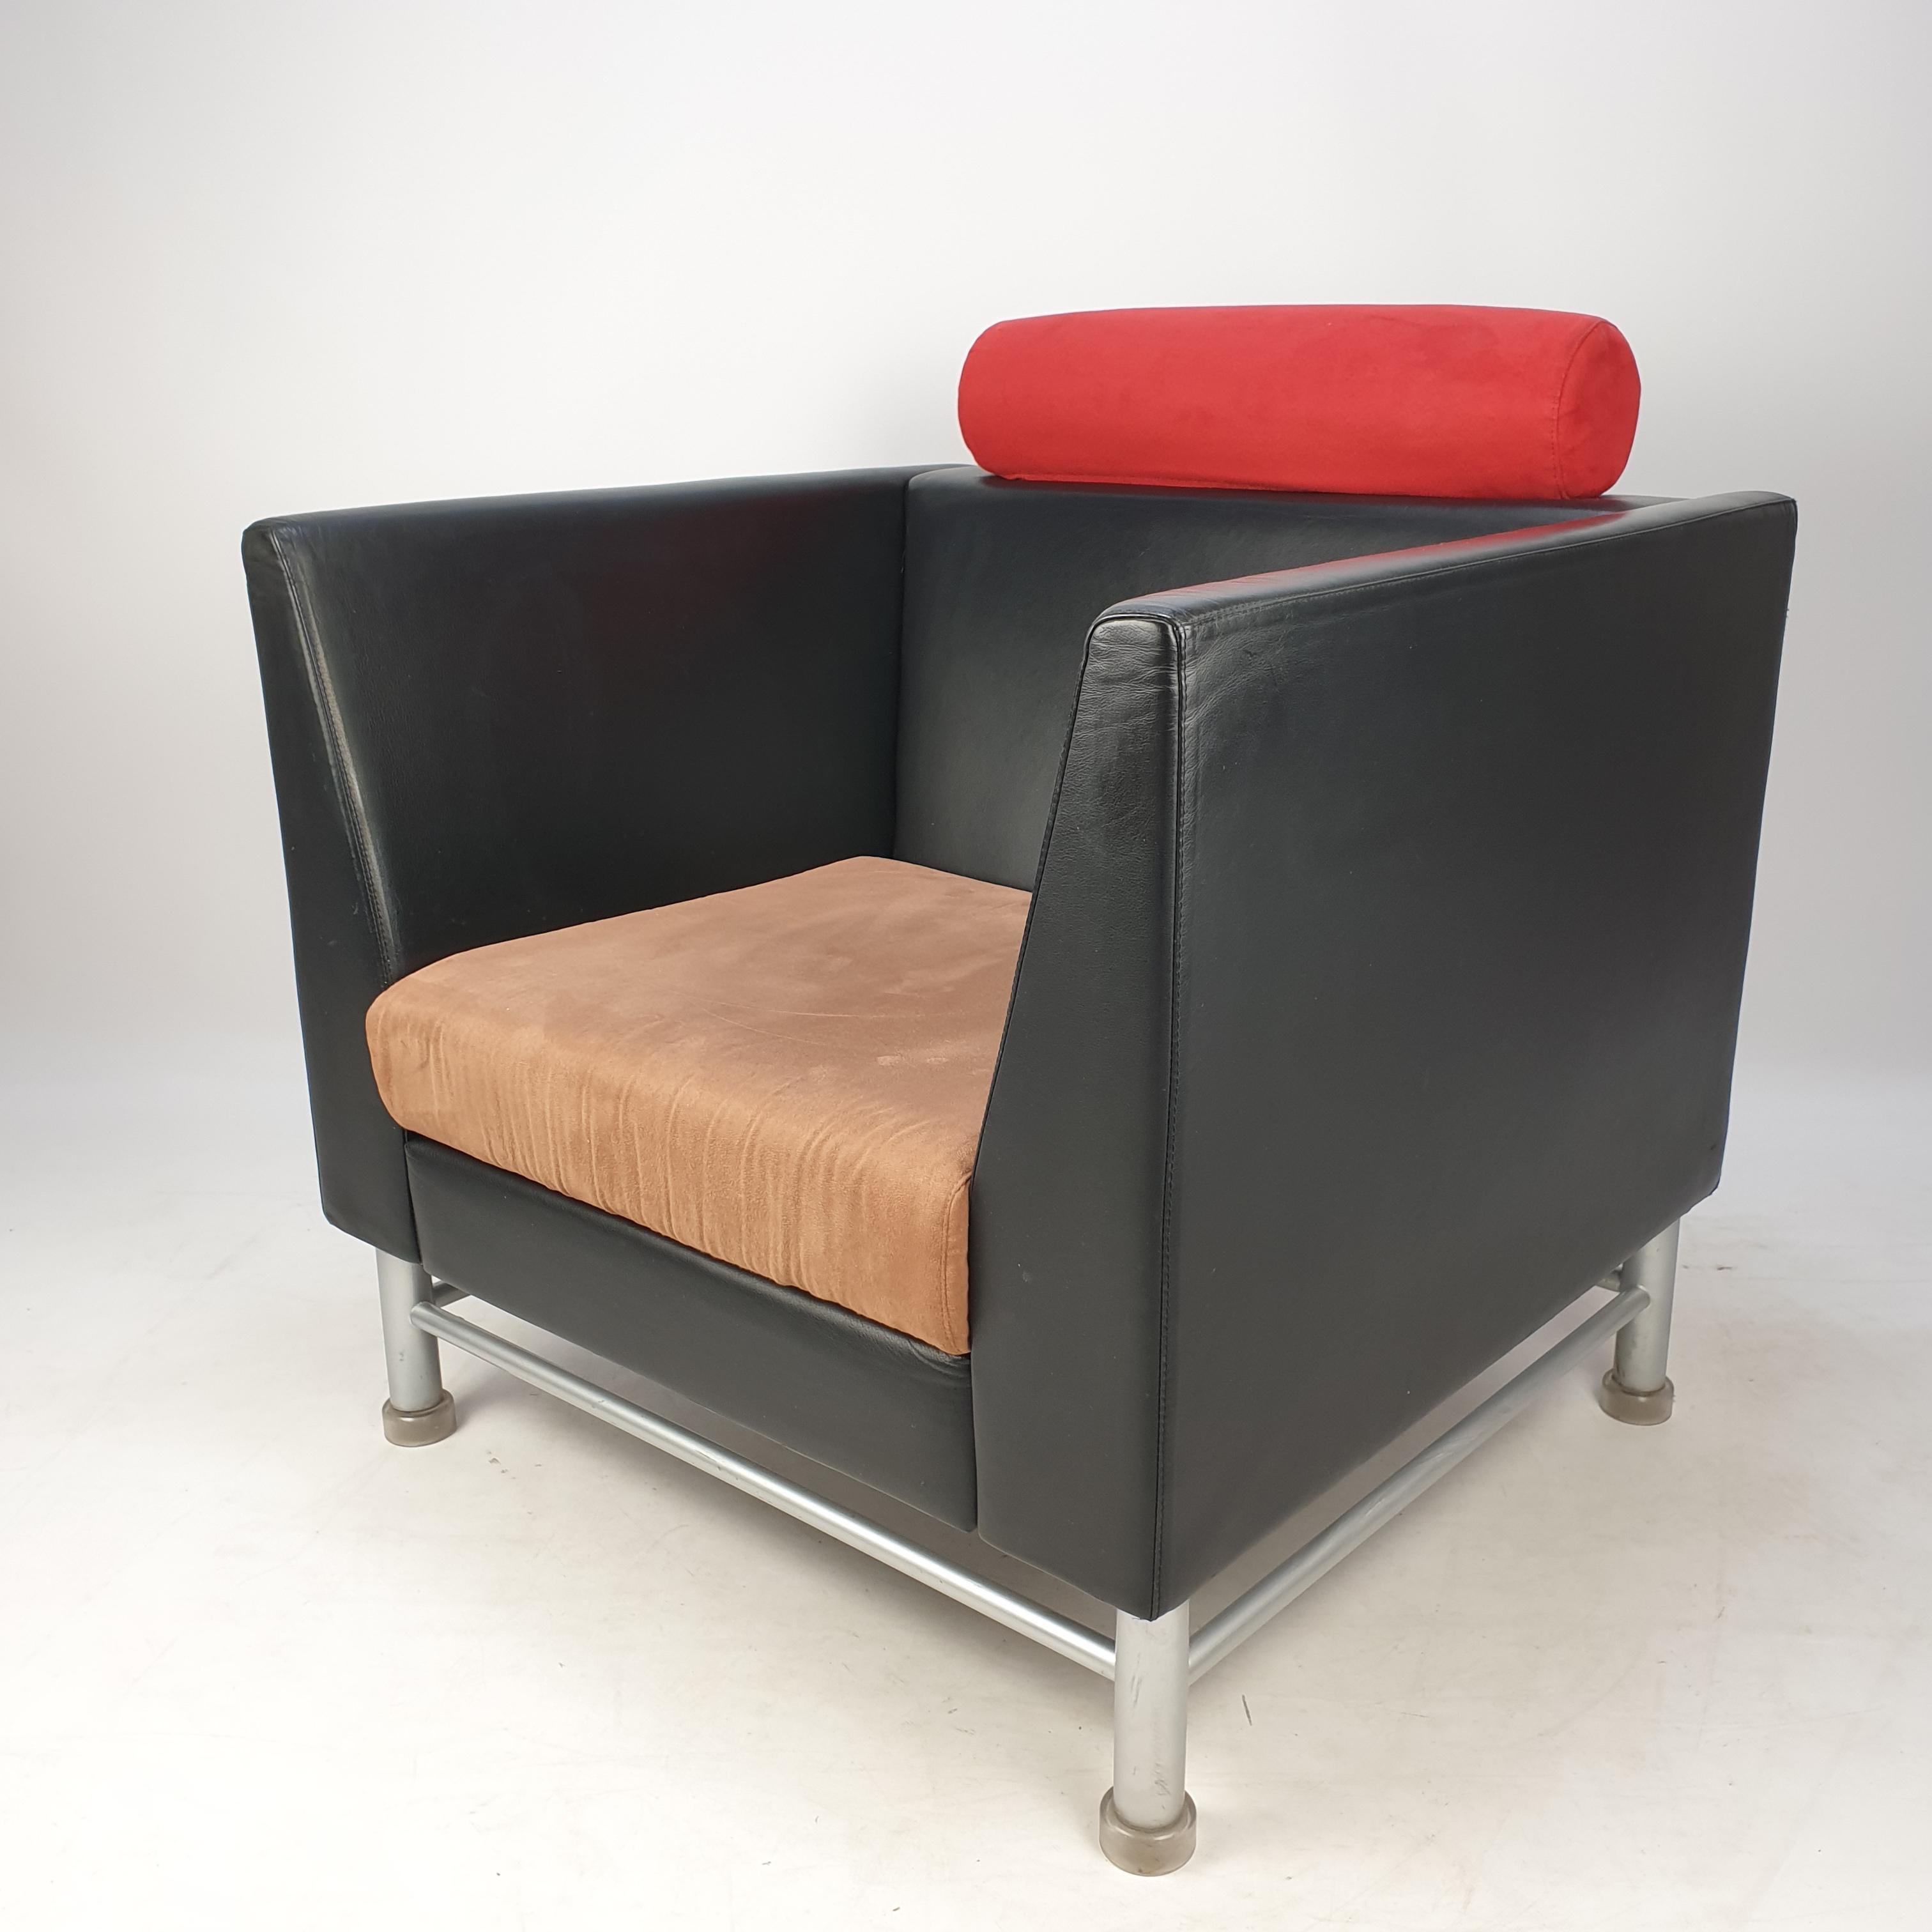 Wonderful lounge chair with its original soft leather upholstery in great condition. This suburb lounge chair features gray lacquered steel feet with translucent plastic end pieces. Designed by Ettore Sottsass and manufactured by Knoll. In 1983, two